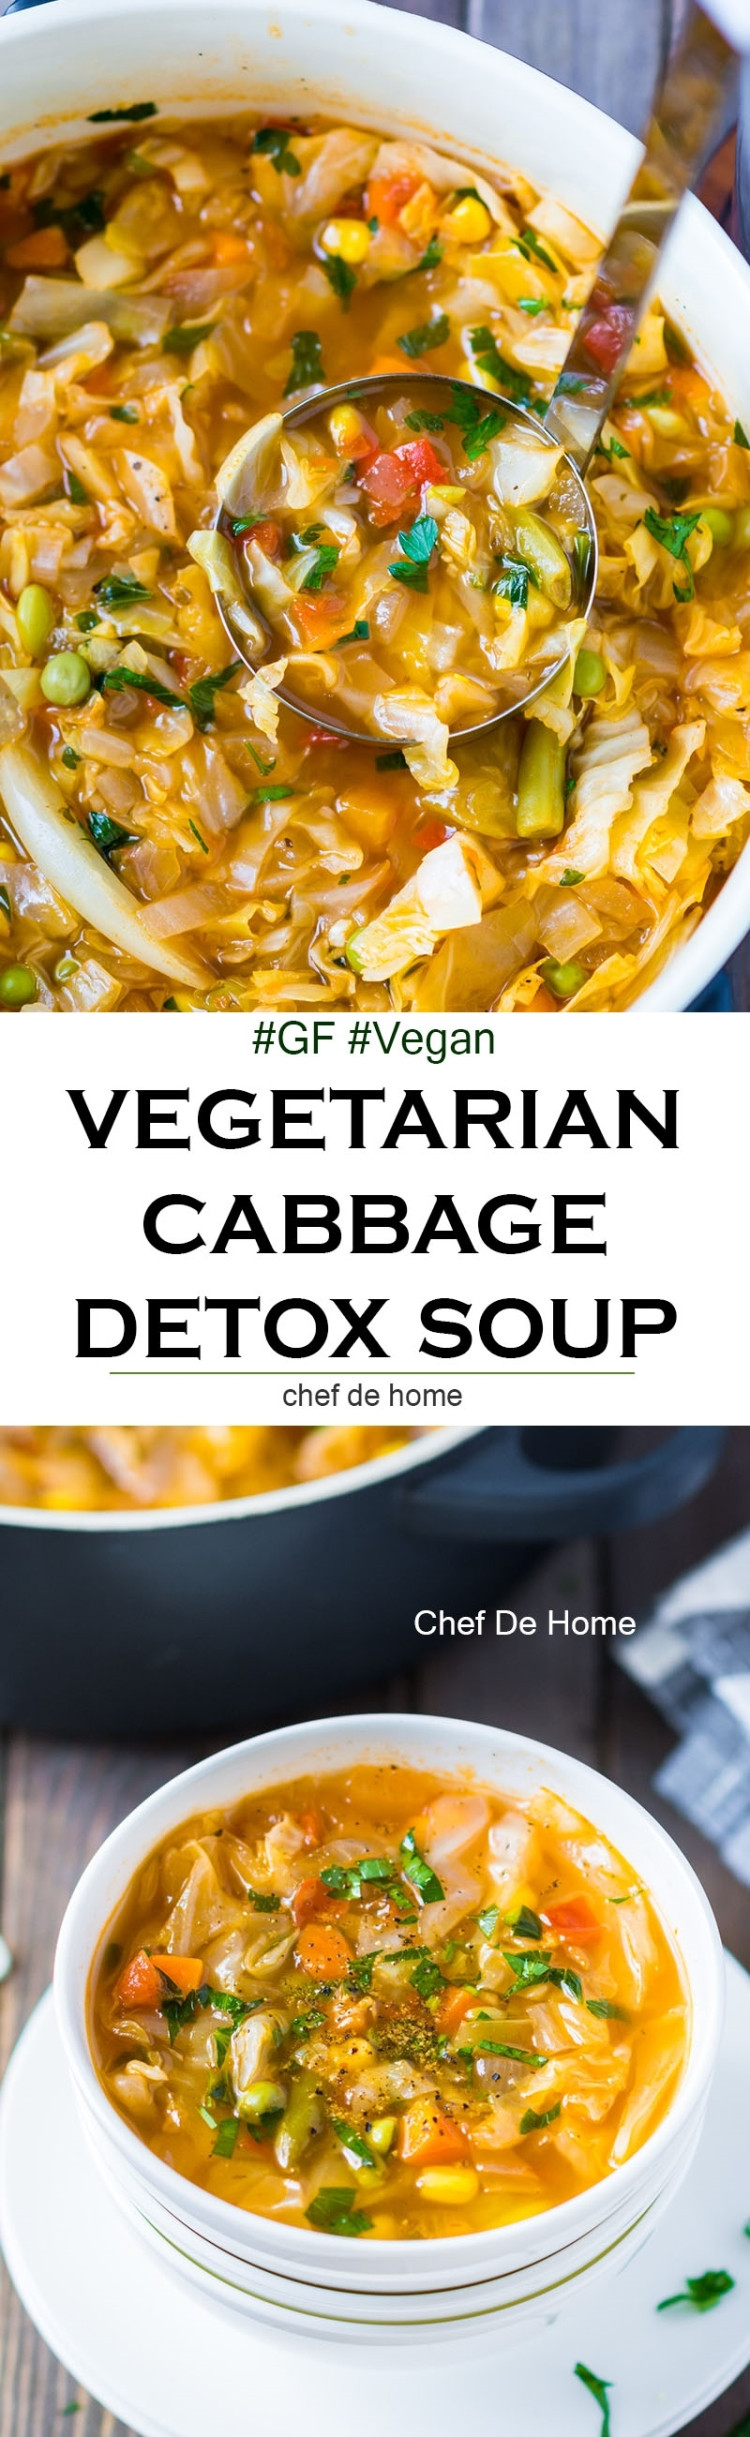 Vegetarian Cabbage Recipes Easy
 Ve arian Cabbage Soup Recipe